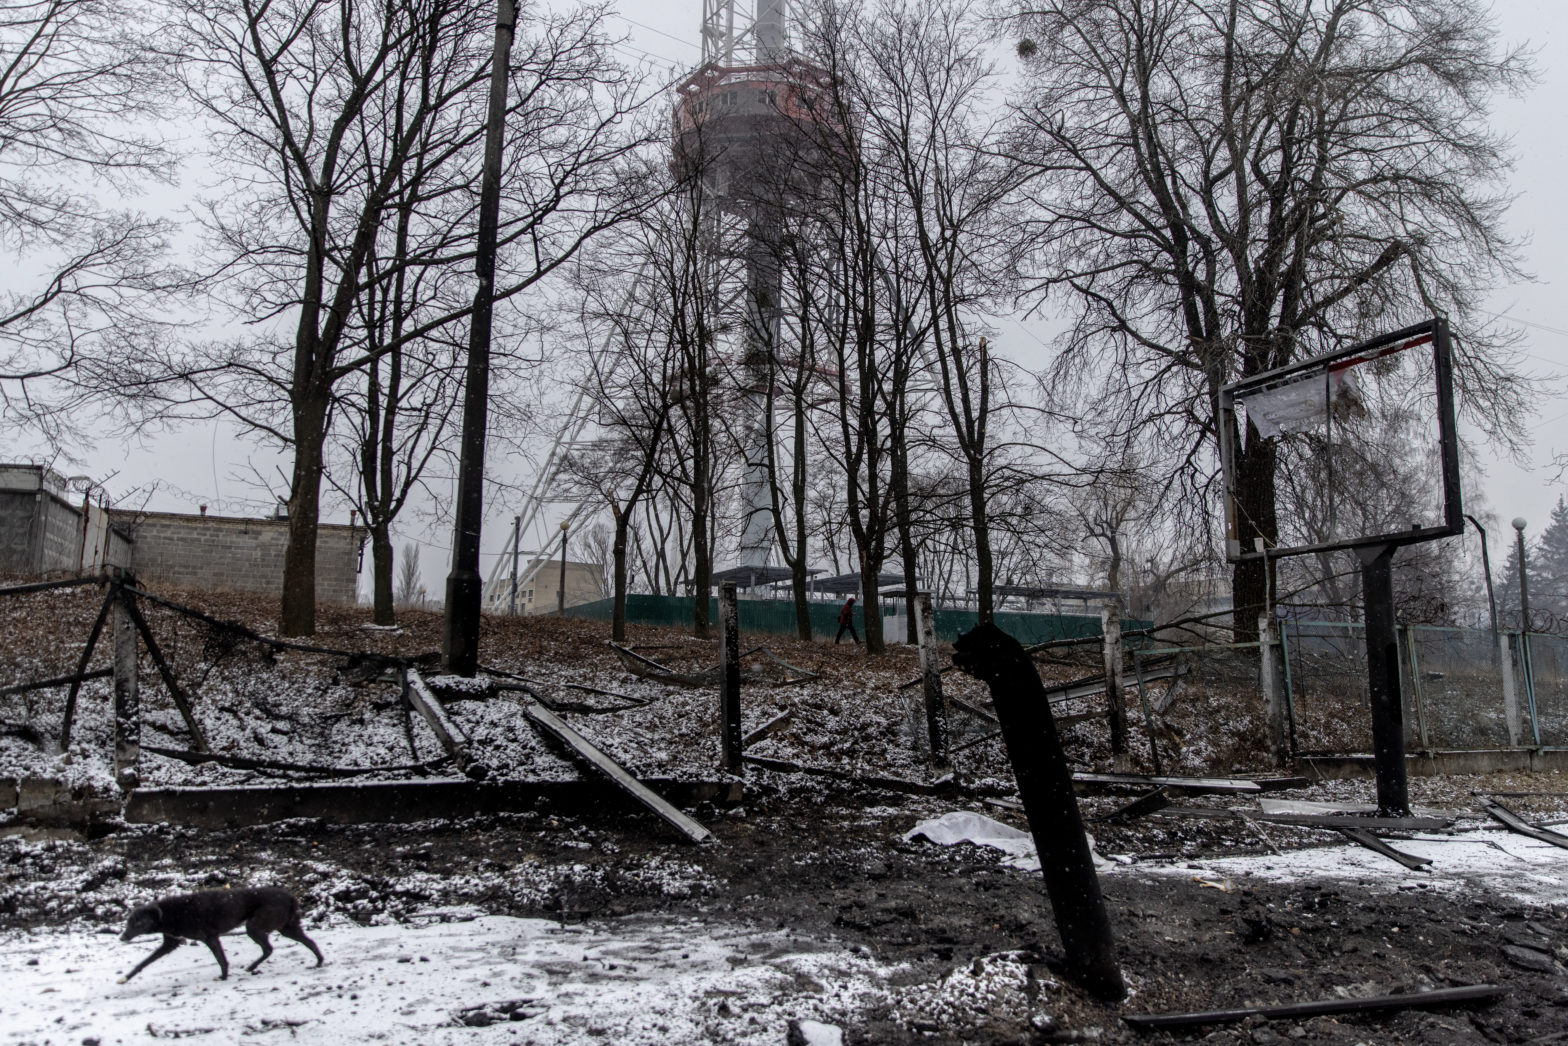 Babyn Yar: Outrage After Russian Missile Appears to Strike Holocaust Memorial in Ukraine